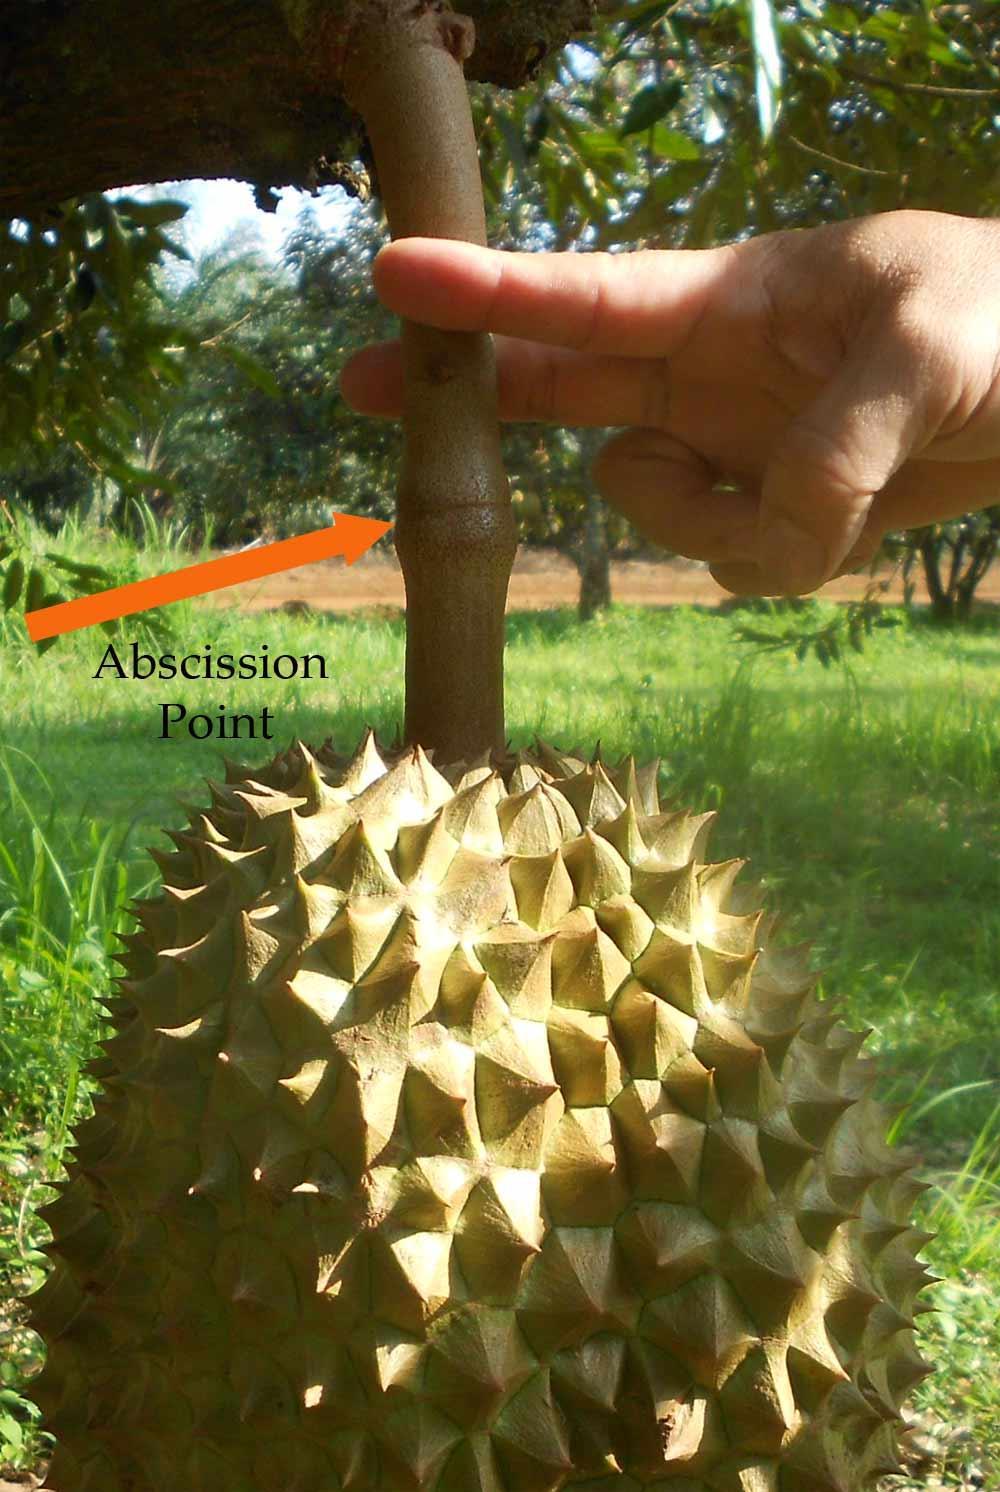 The stem of all durians, even those picked underripe, will break off at this point